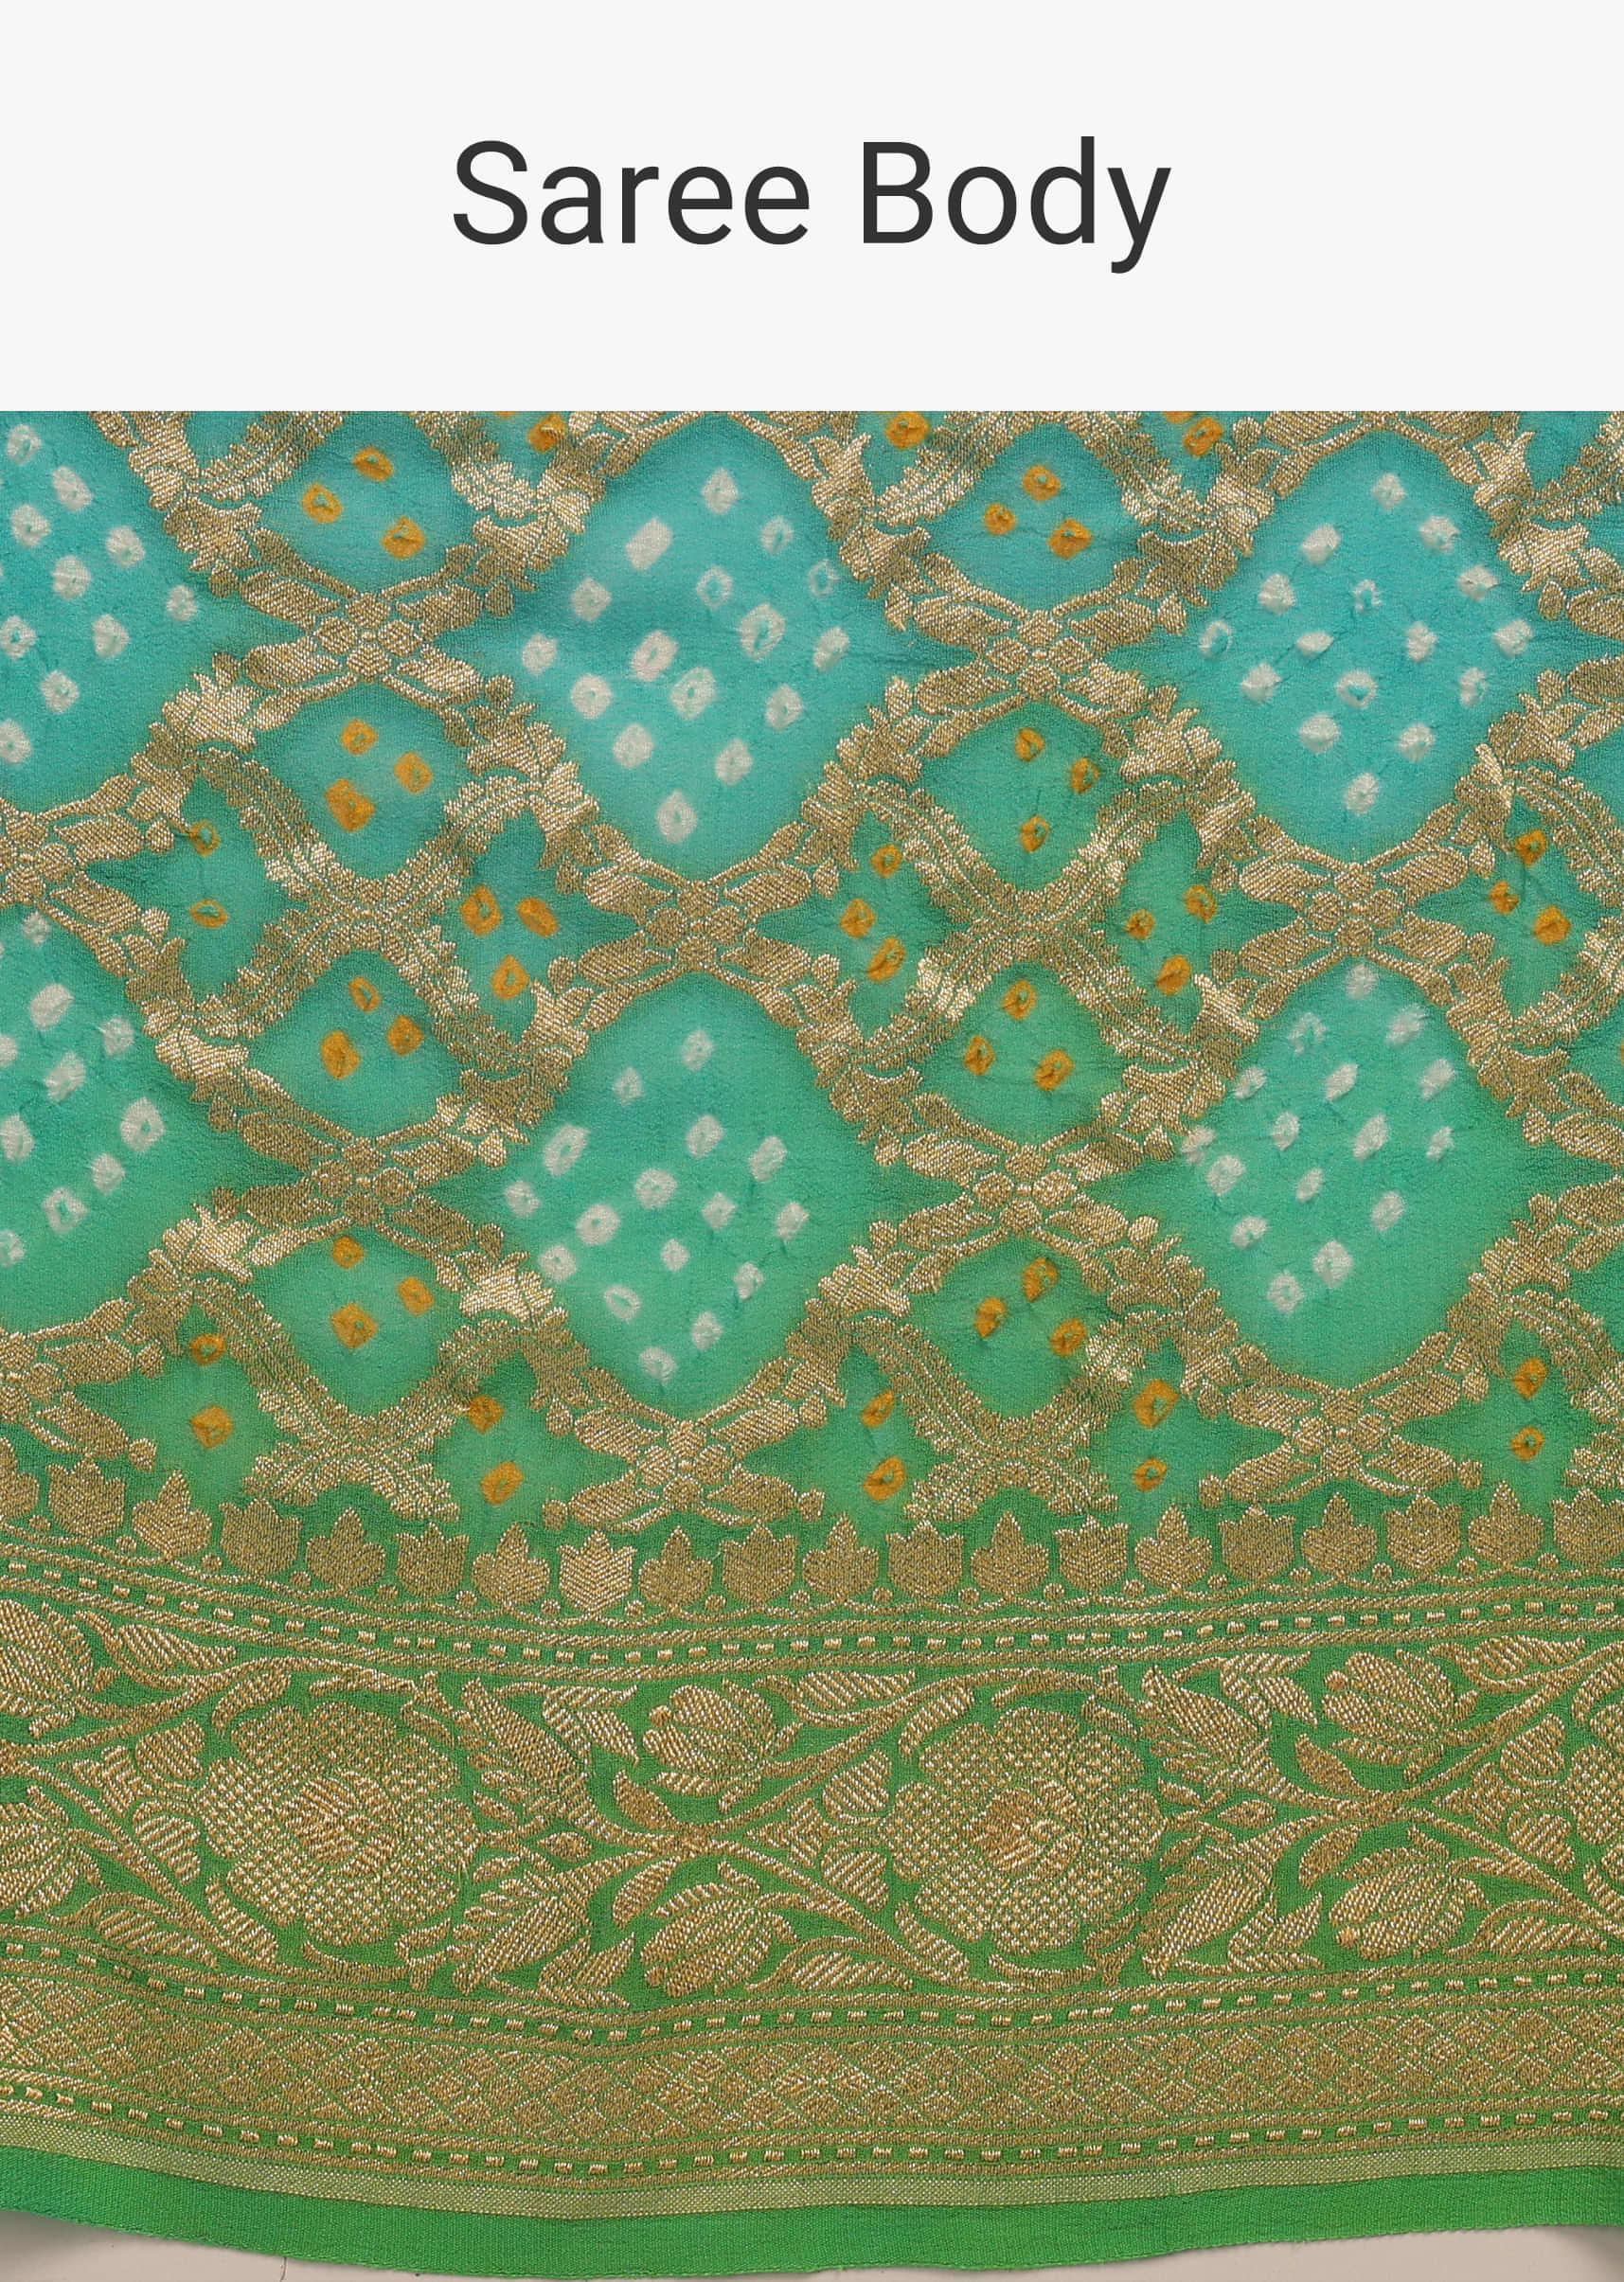 Dual-Tone Sea Green And River Blue Saree In Bandhani Handwoven Georgette With Floral Jaal Weave